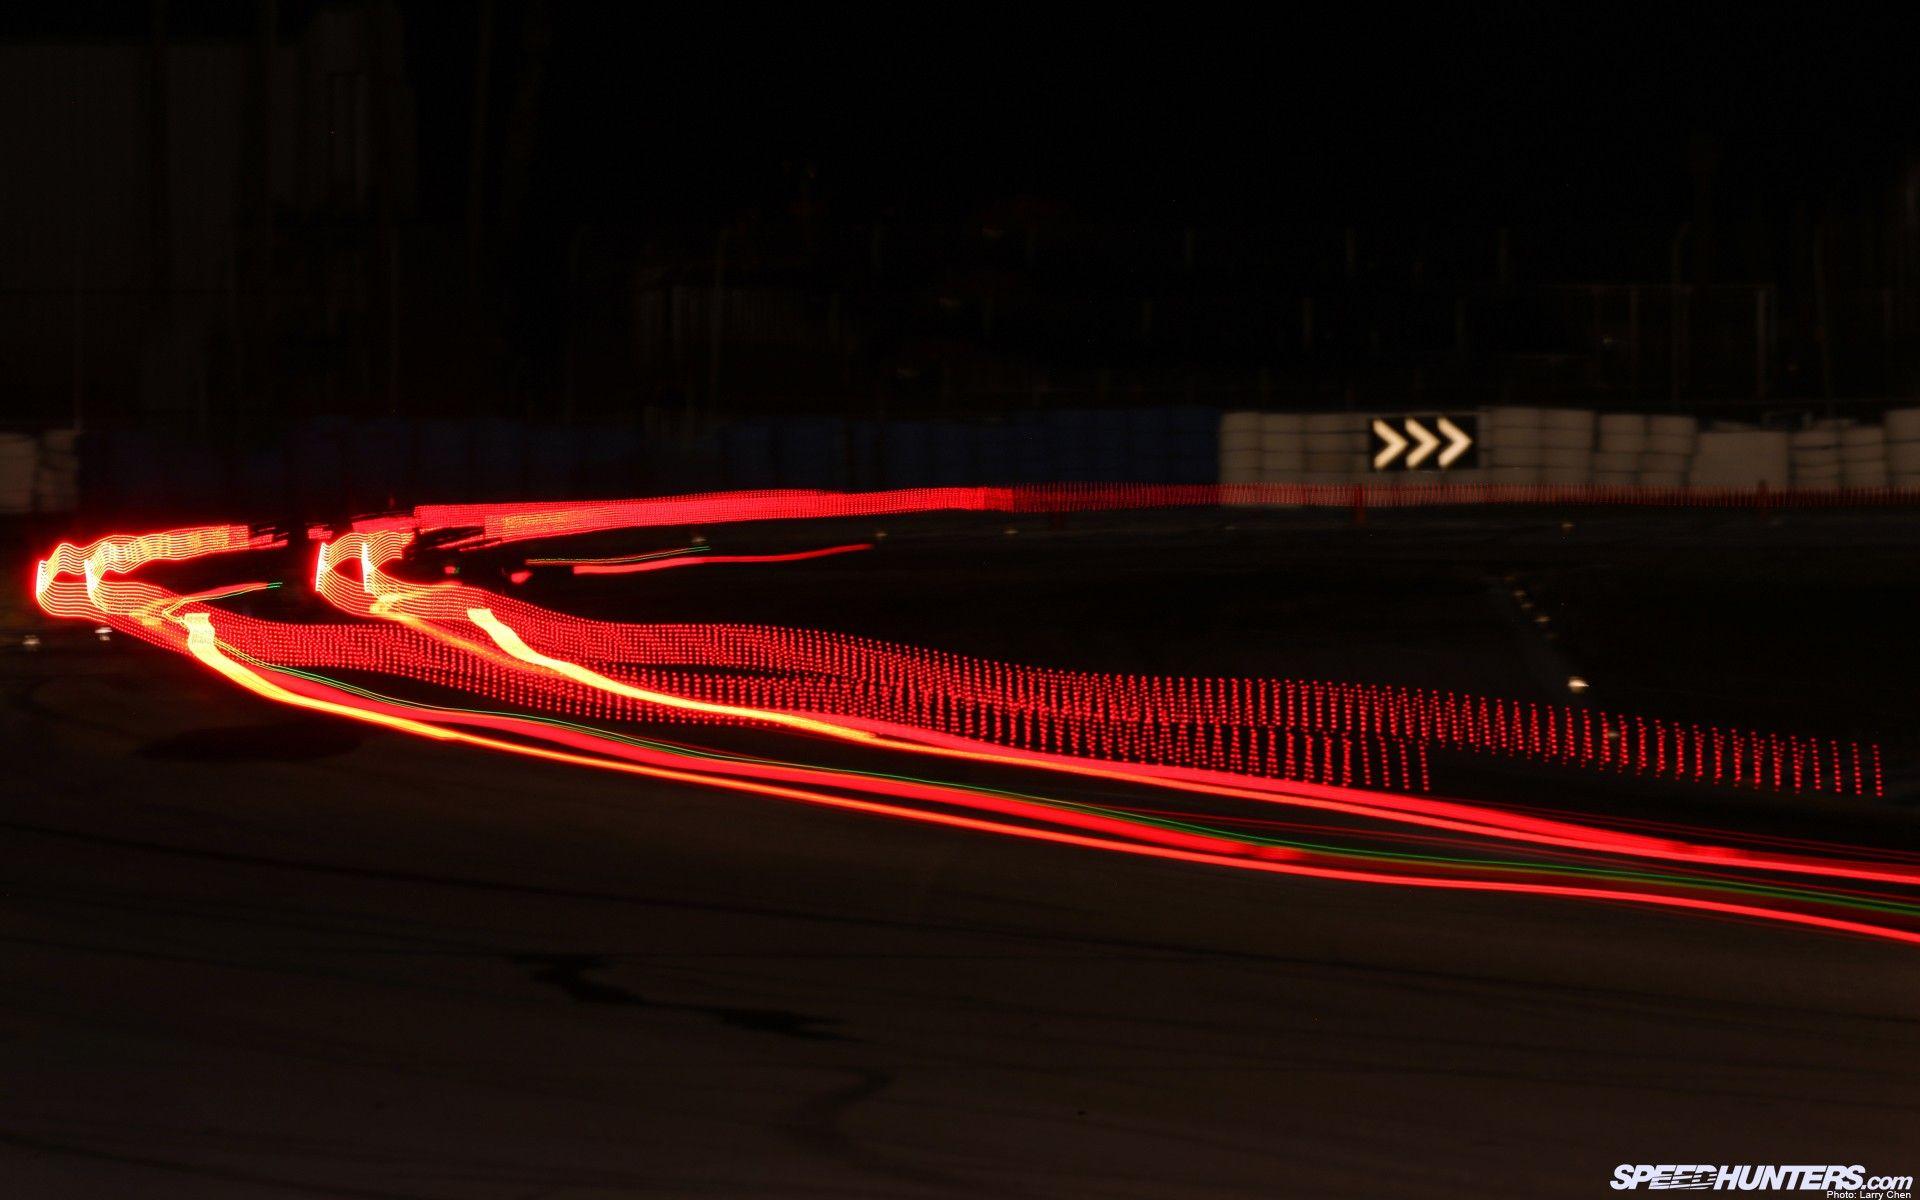 Wallpaper, night, car, red, long exposure, neon sign, light trails